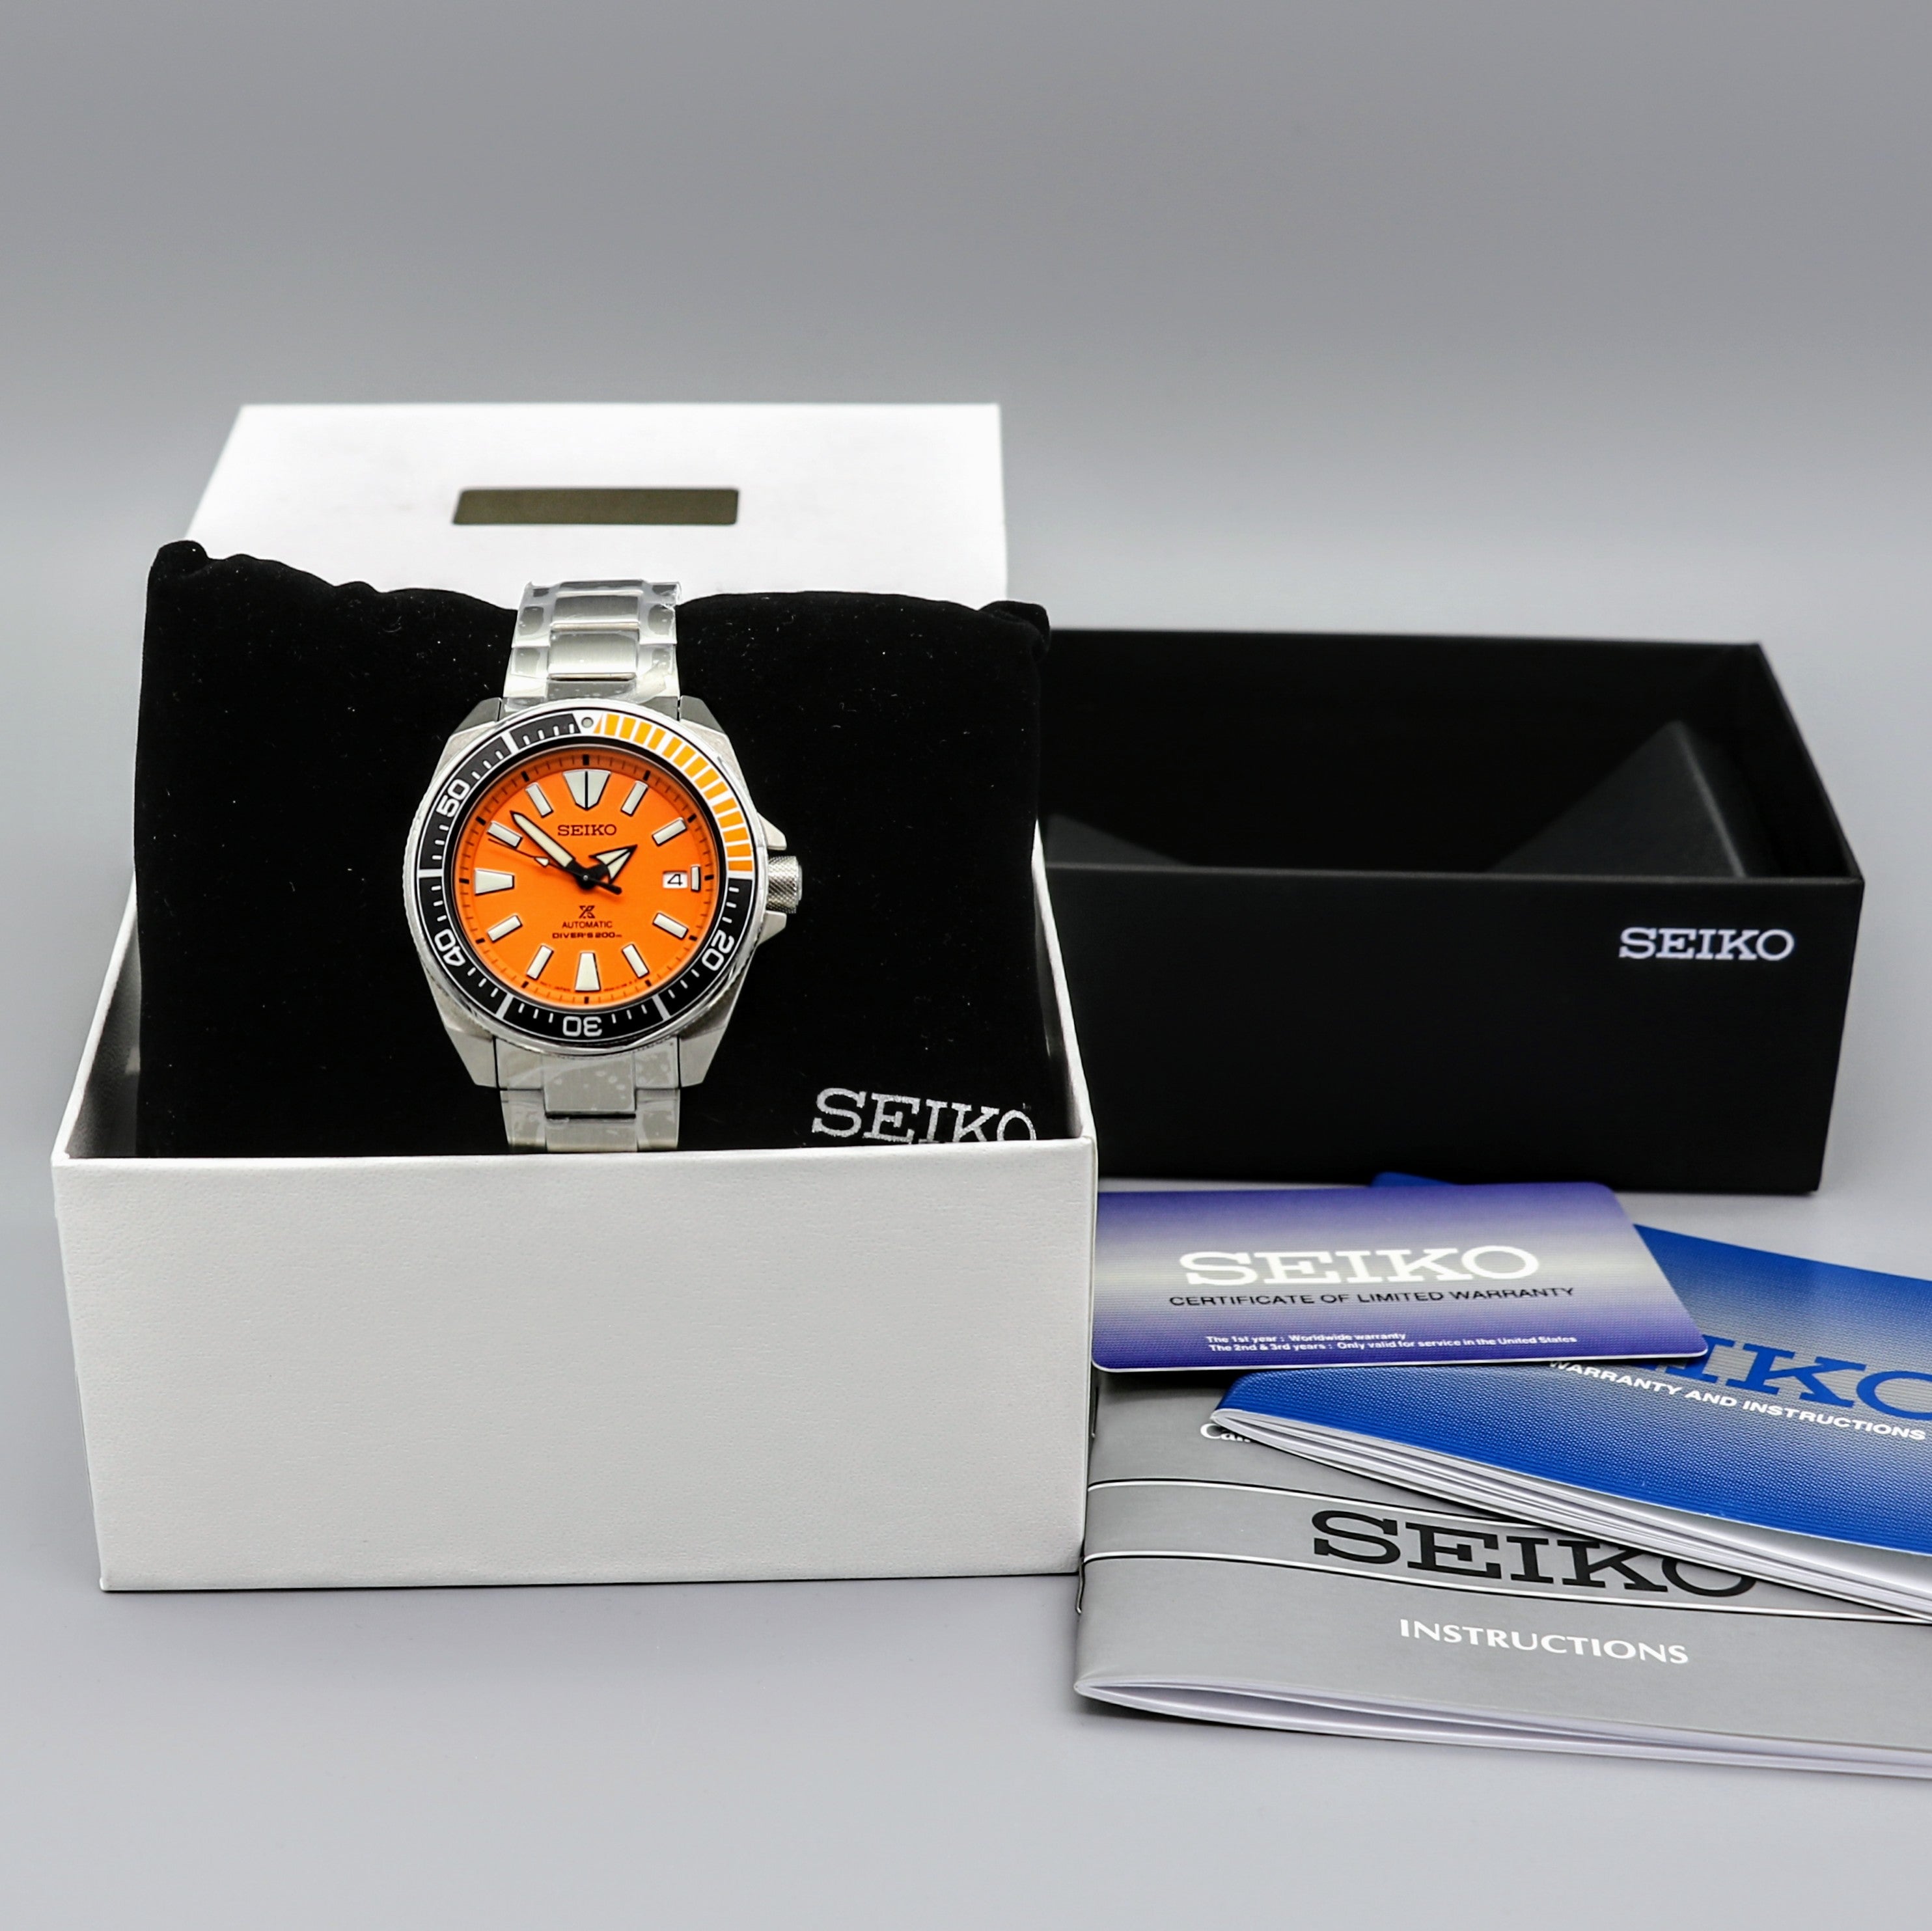 NEW W/ BOX & PAPERS SEIKO Prospex Automatic Diver's Wristwatch DISCONT –  SECOND HAND HOROLOGY